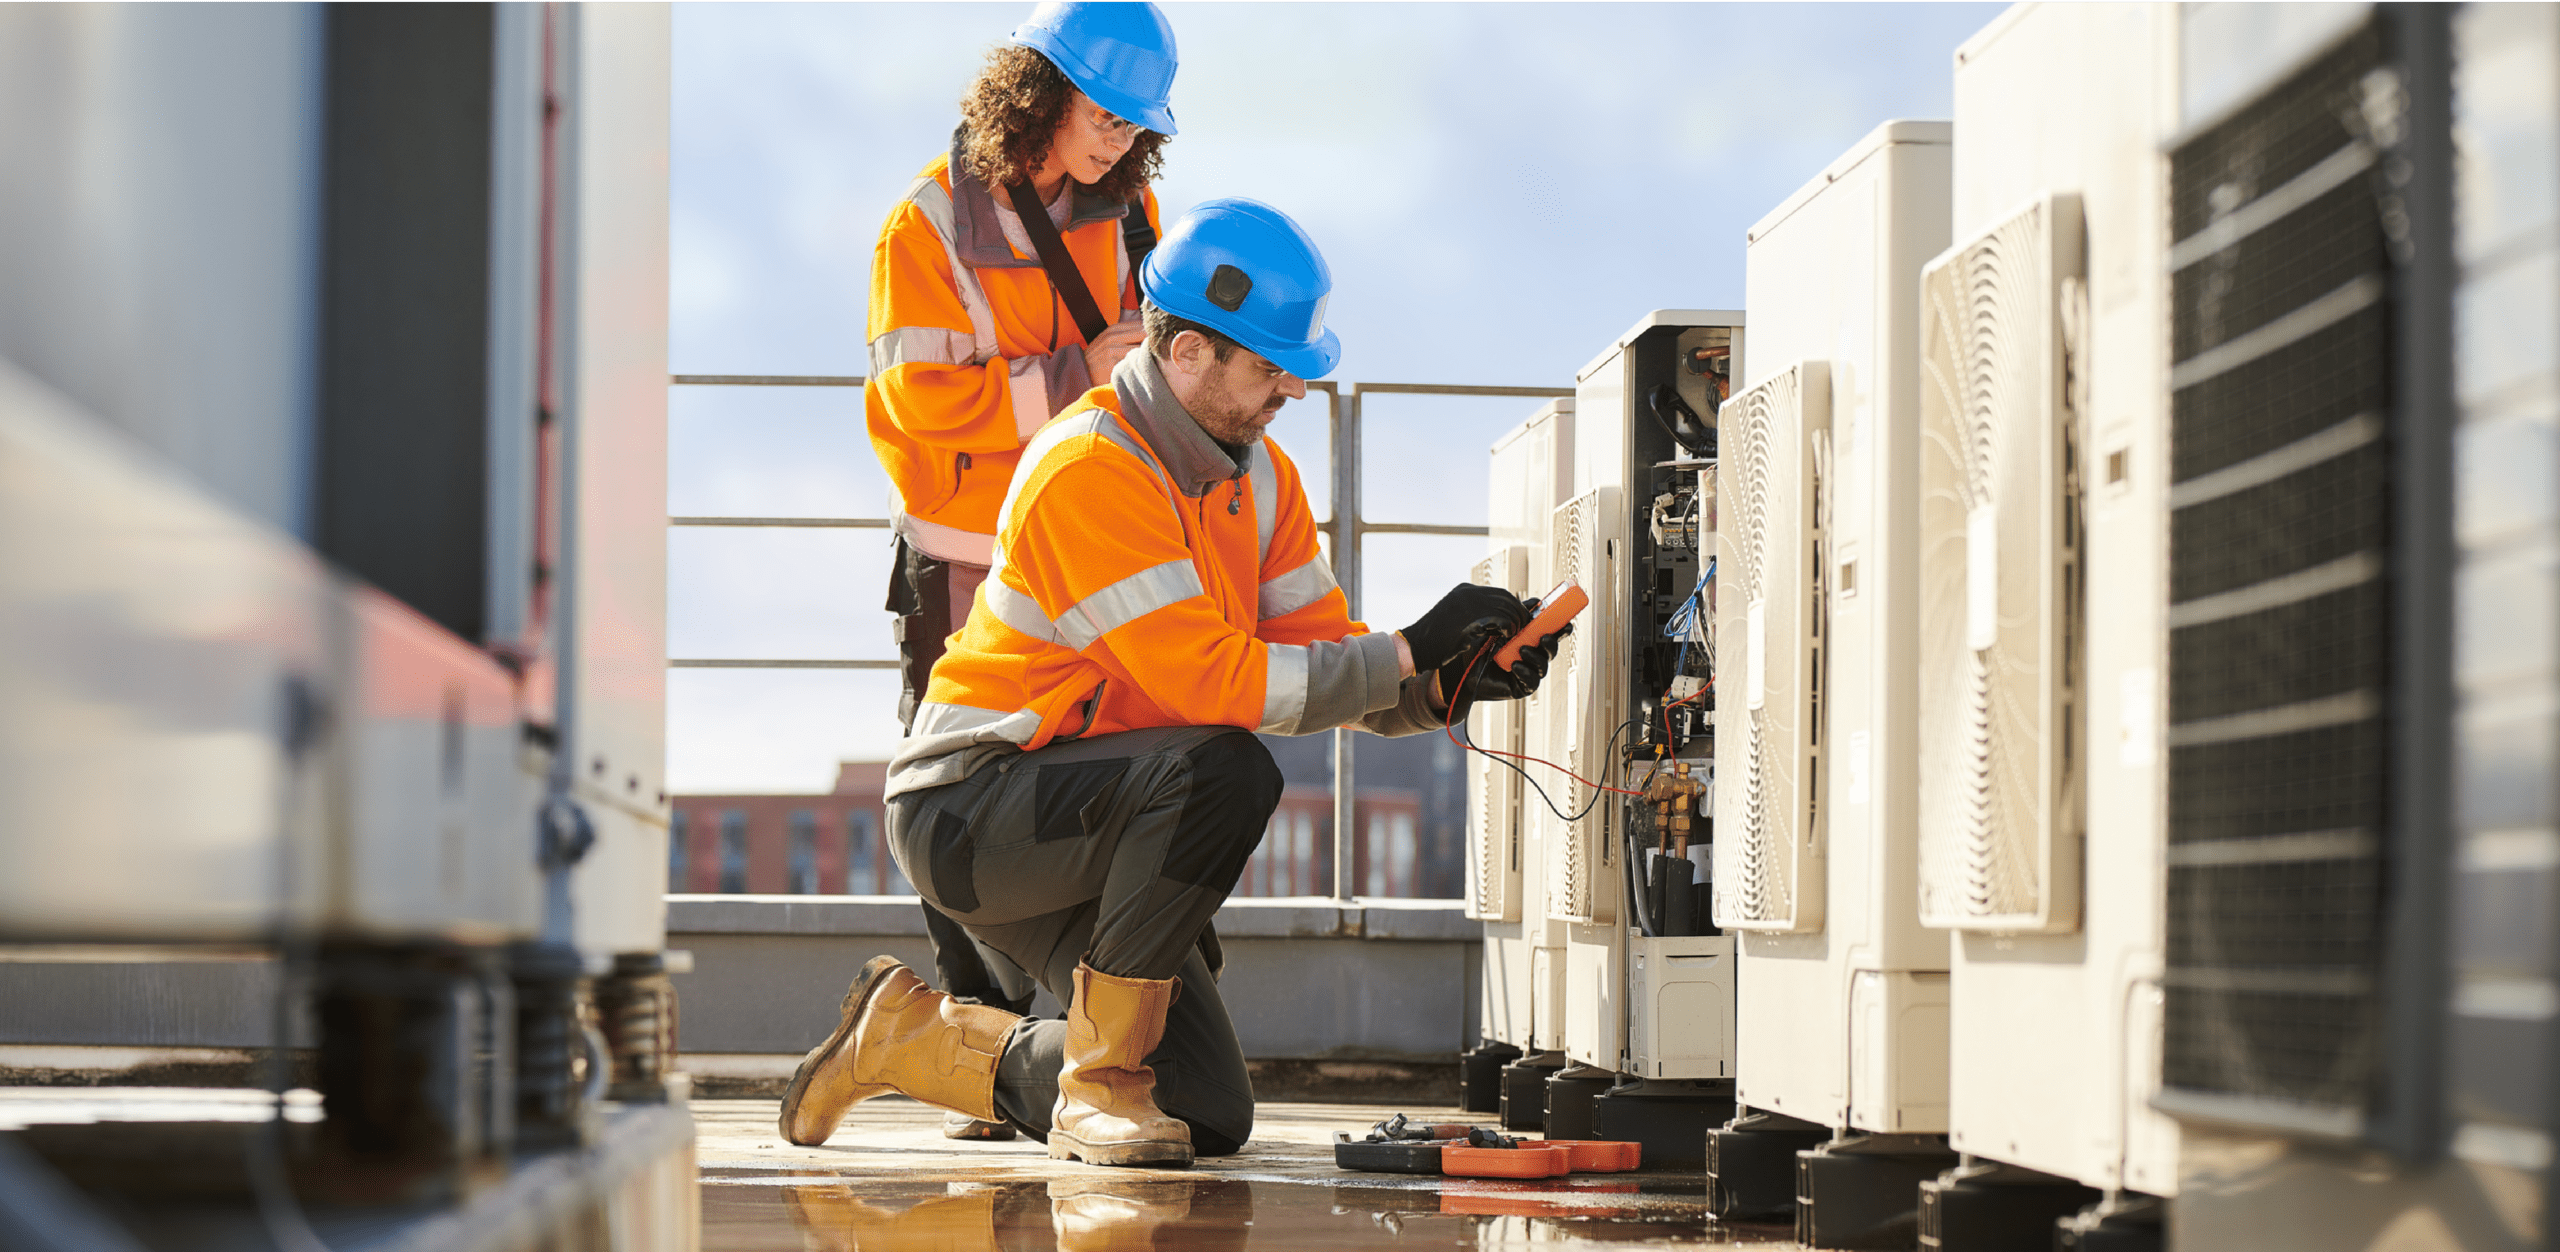 A woman and a man wearing safety helmets and jackets are on a rooftop working on something.